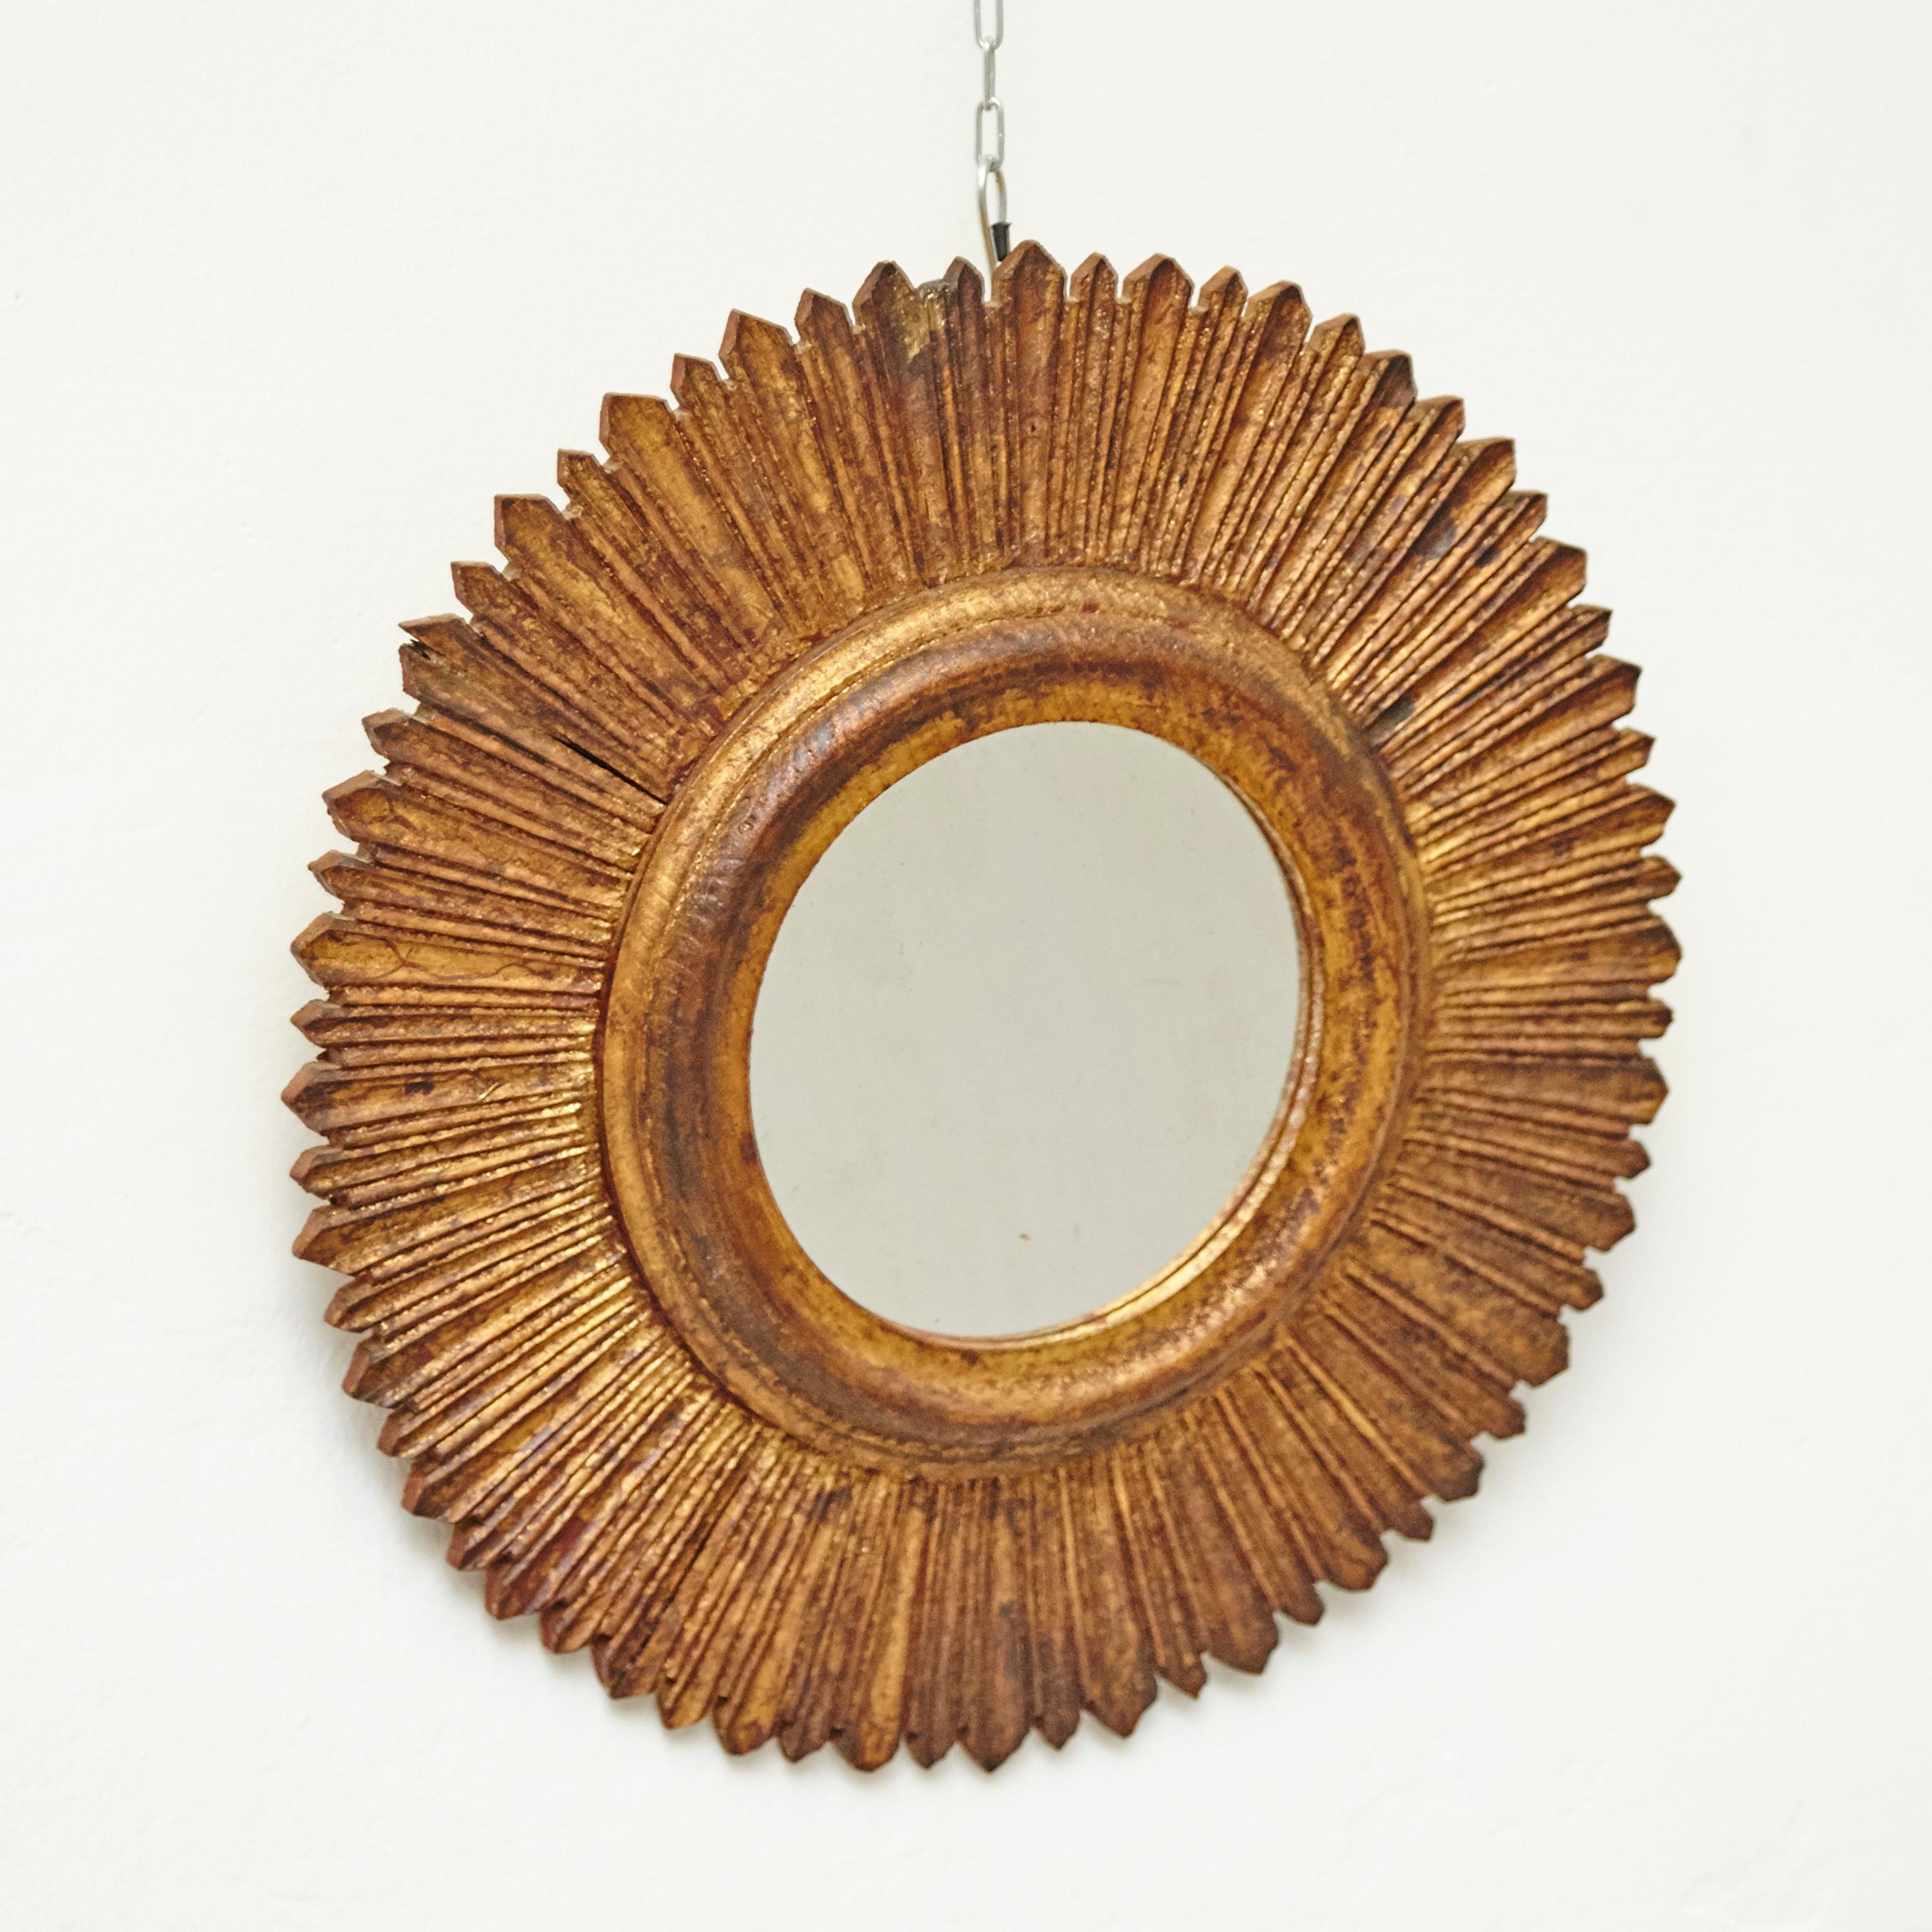 Mid-Century Modern sunburst wall mirror.
By unknown manufacturer, France, circa 1960.
In original condition, with minor wear consistent with age and use, preserving a beautiful patina.

Materials:
Mirror
Wood

Dimensions:
Ø 38 cm x D 3 cm.